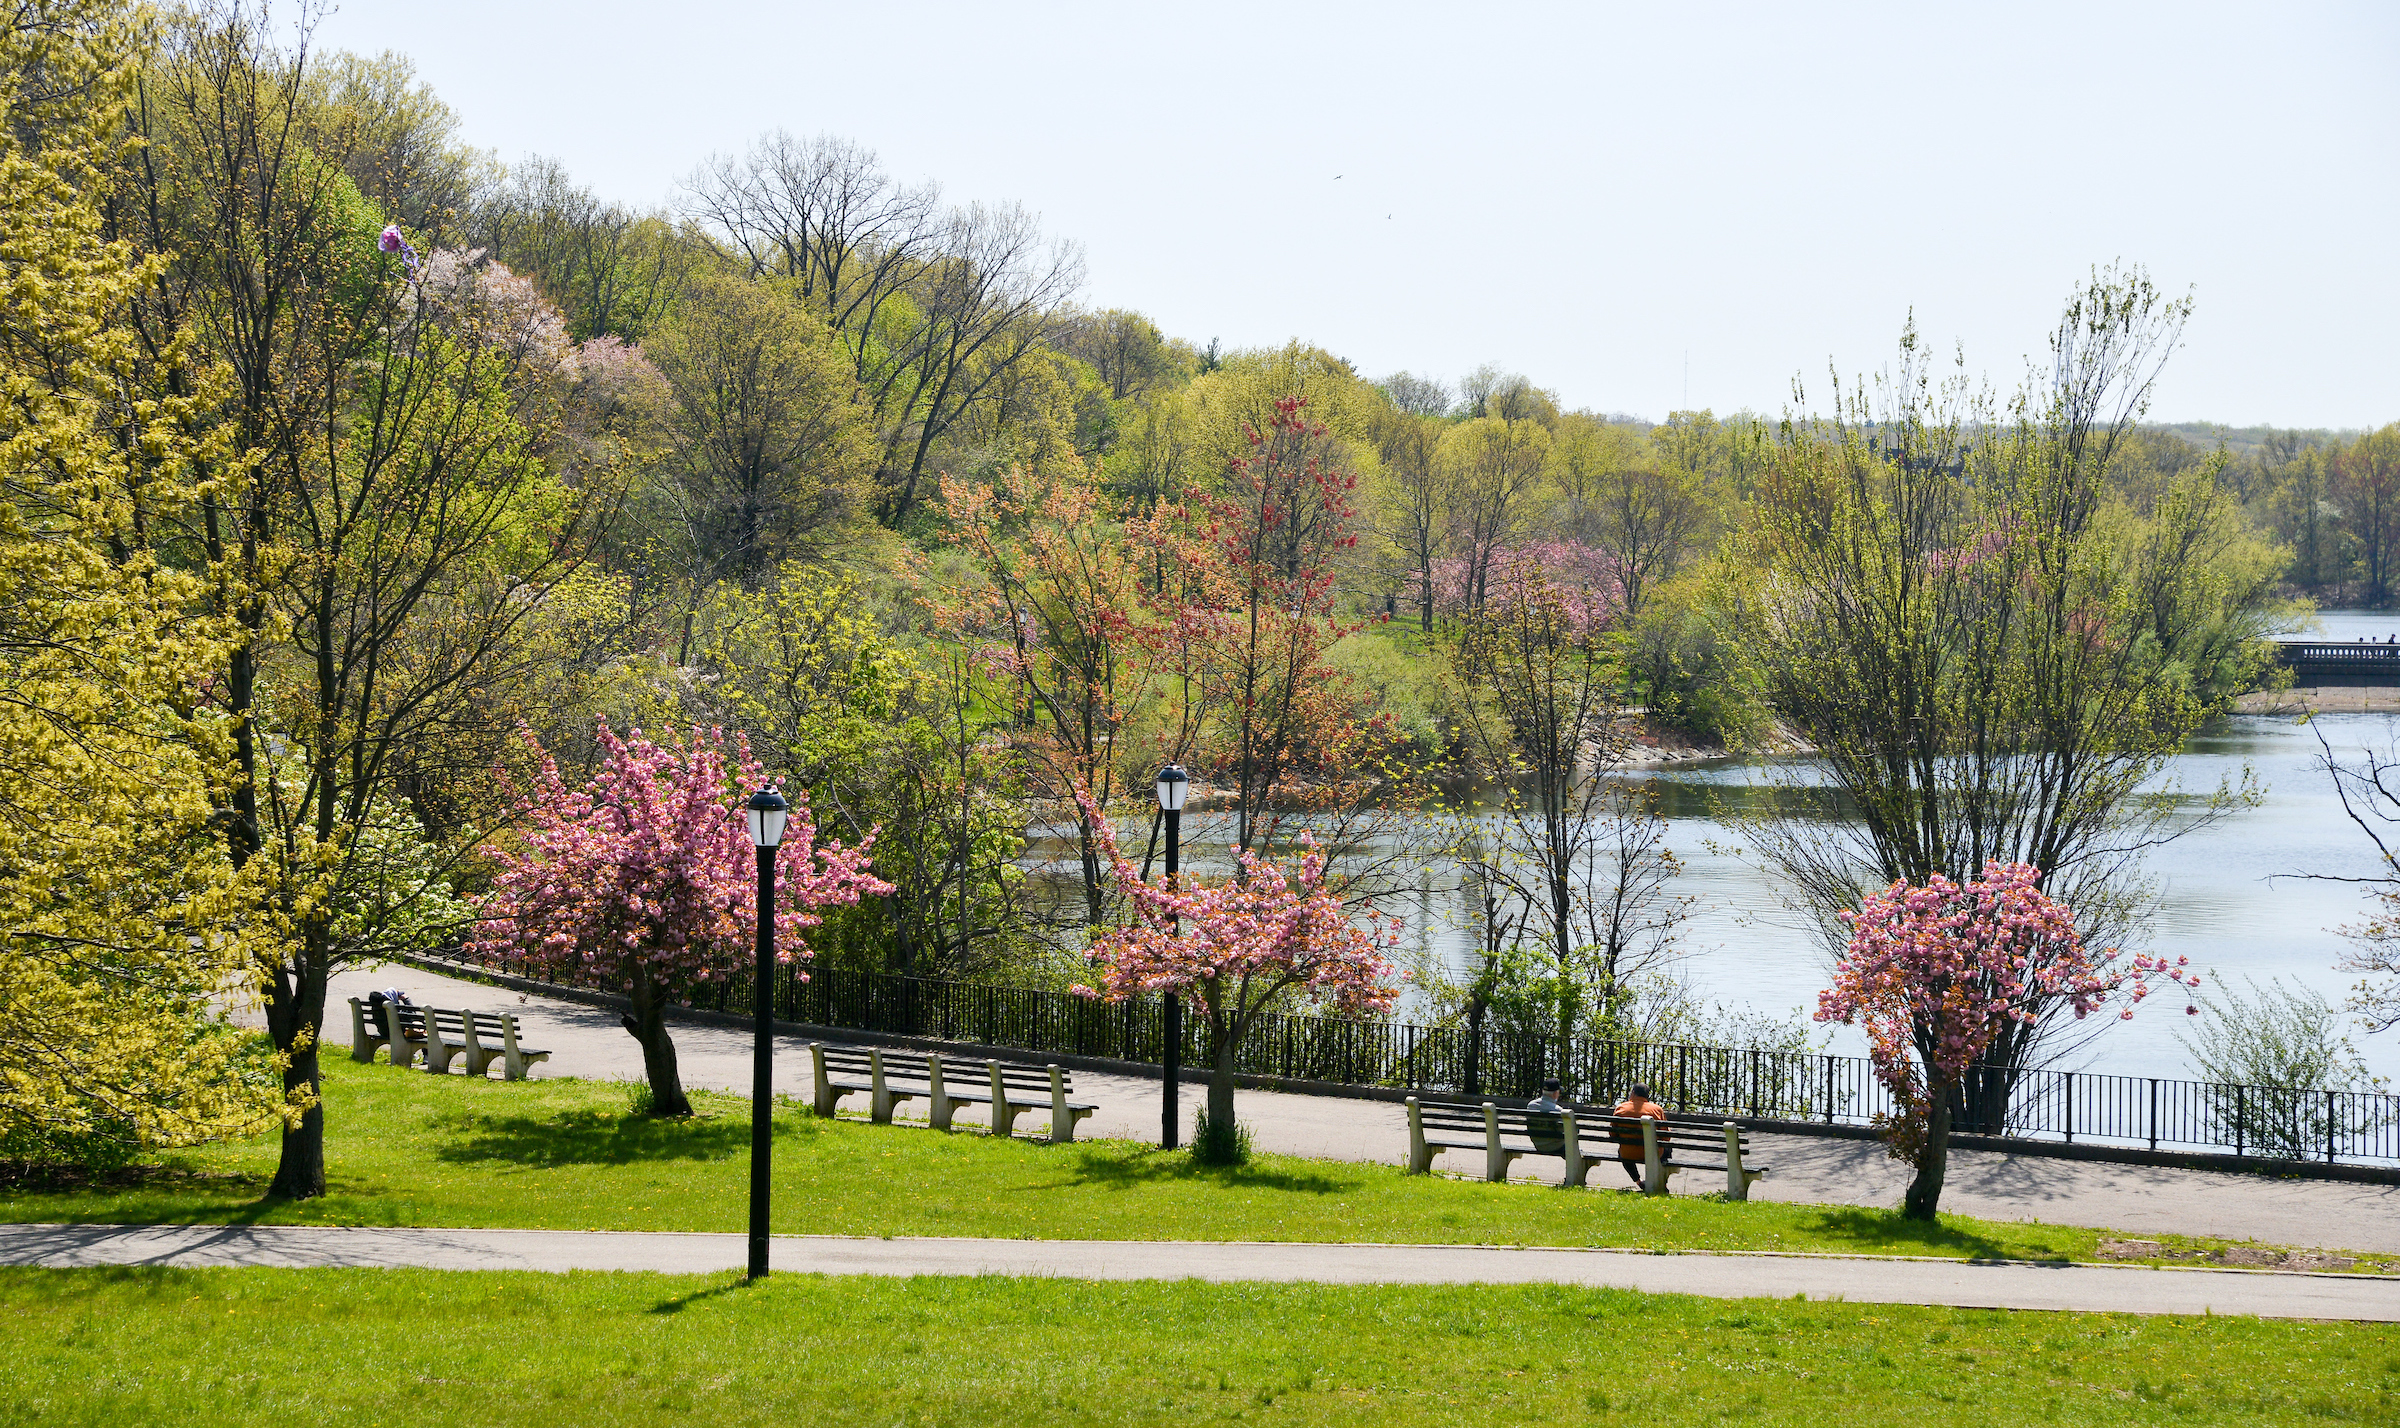 cherry blossoms dot the lake's promenade where folks sit on benches to look out to the water